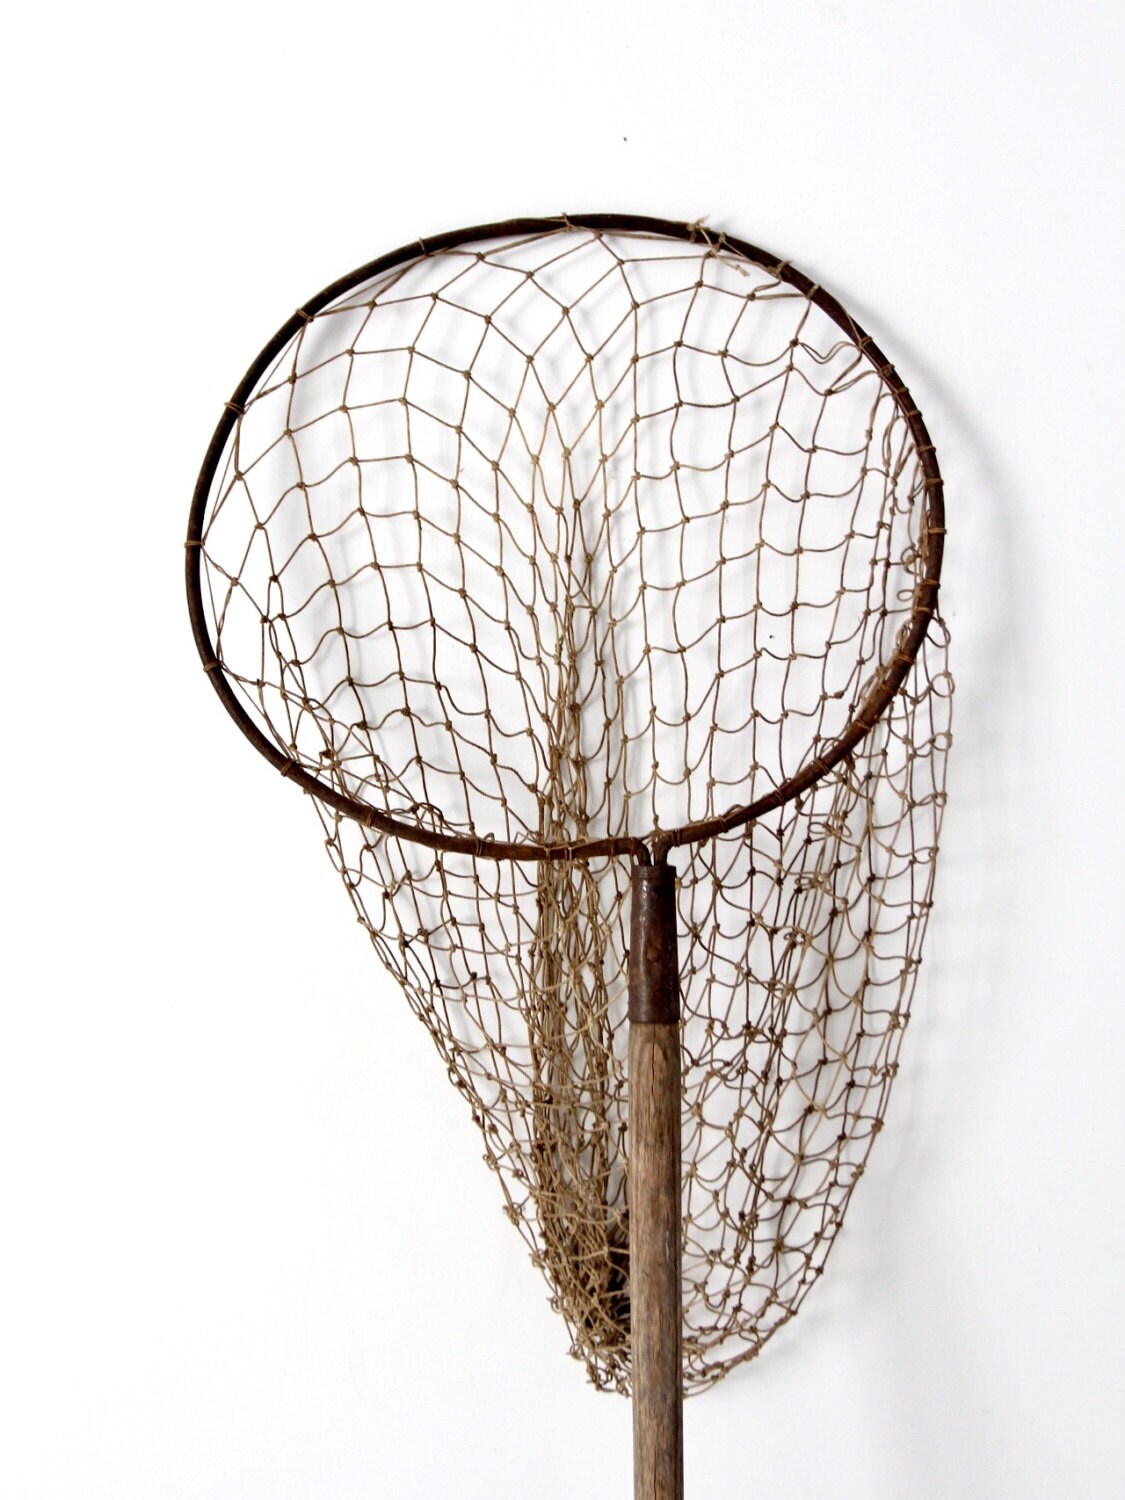 Antique Fish Net on Pole, Large Hand Held Fishing Net -  Canada